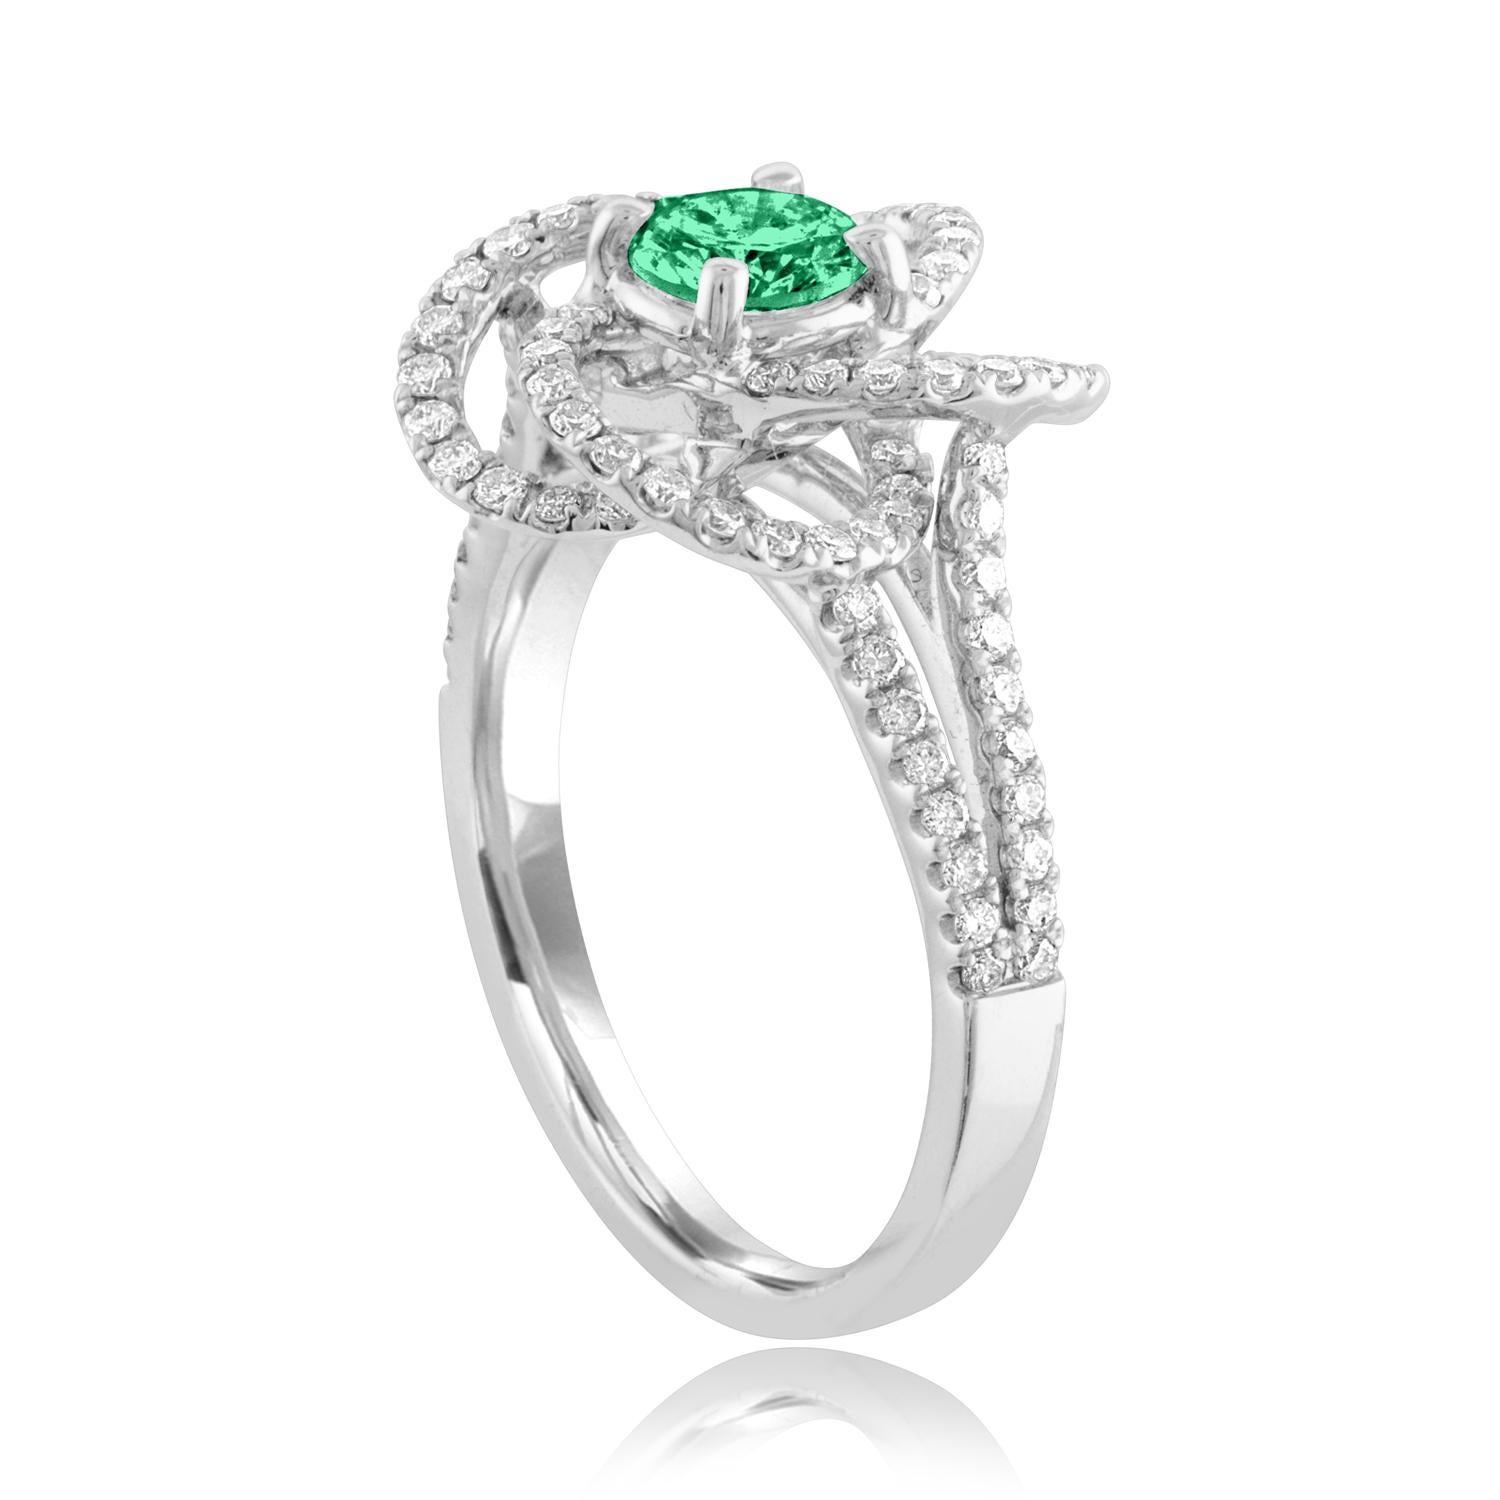 Beautiful Diamond & Emerald Flower Ring
The ring is 18K White Gold.
There are 0.92 Carats in Diamonds F/G VS/SI
The Center is Round 0.35 Carat Emerald.
The Emerald is AGL certified.
The ring is a size 6.50, sizable.
The ring weighs 4.2 grams.